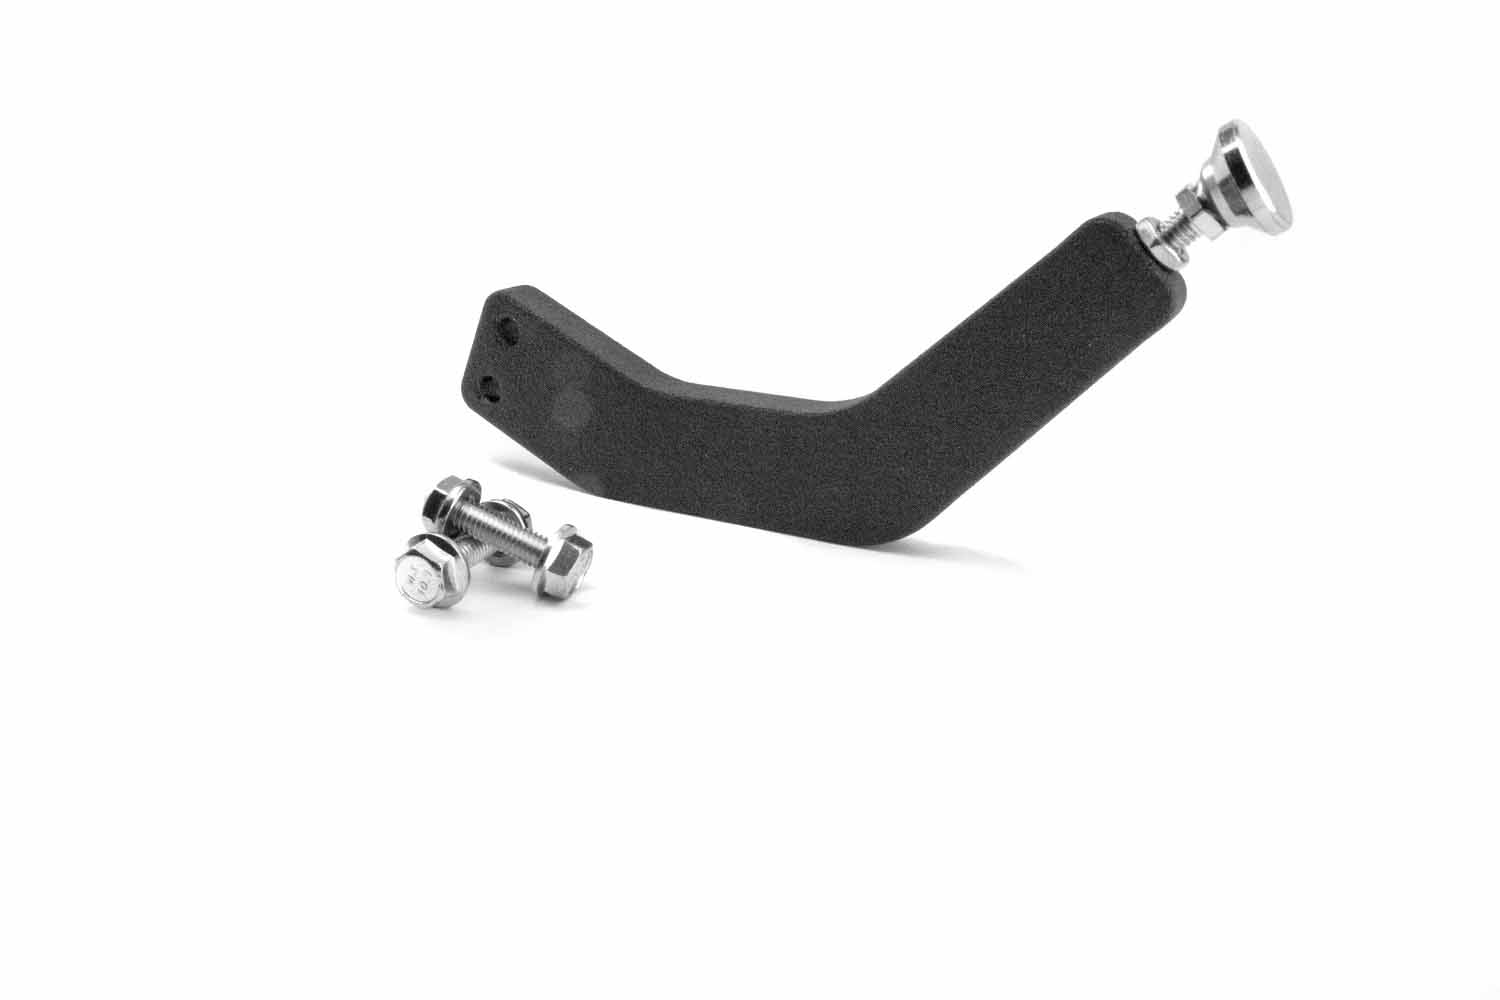 Add a Master Cylinder Brake Brace to your 27WON FSTB for increased pedal feel and driver feedback